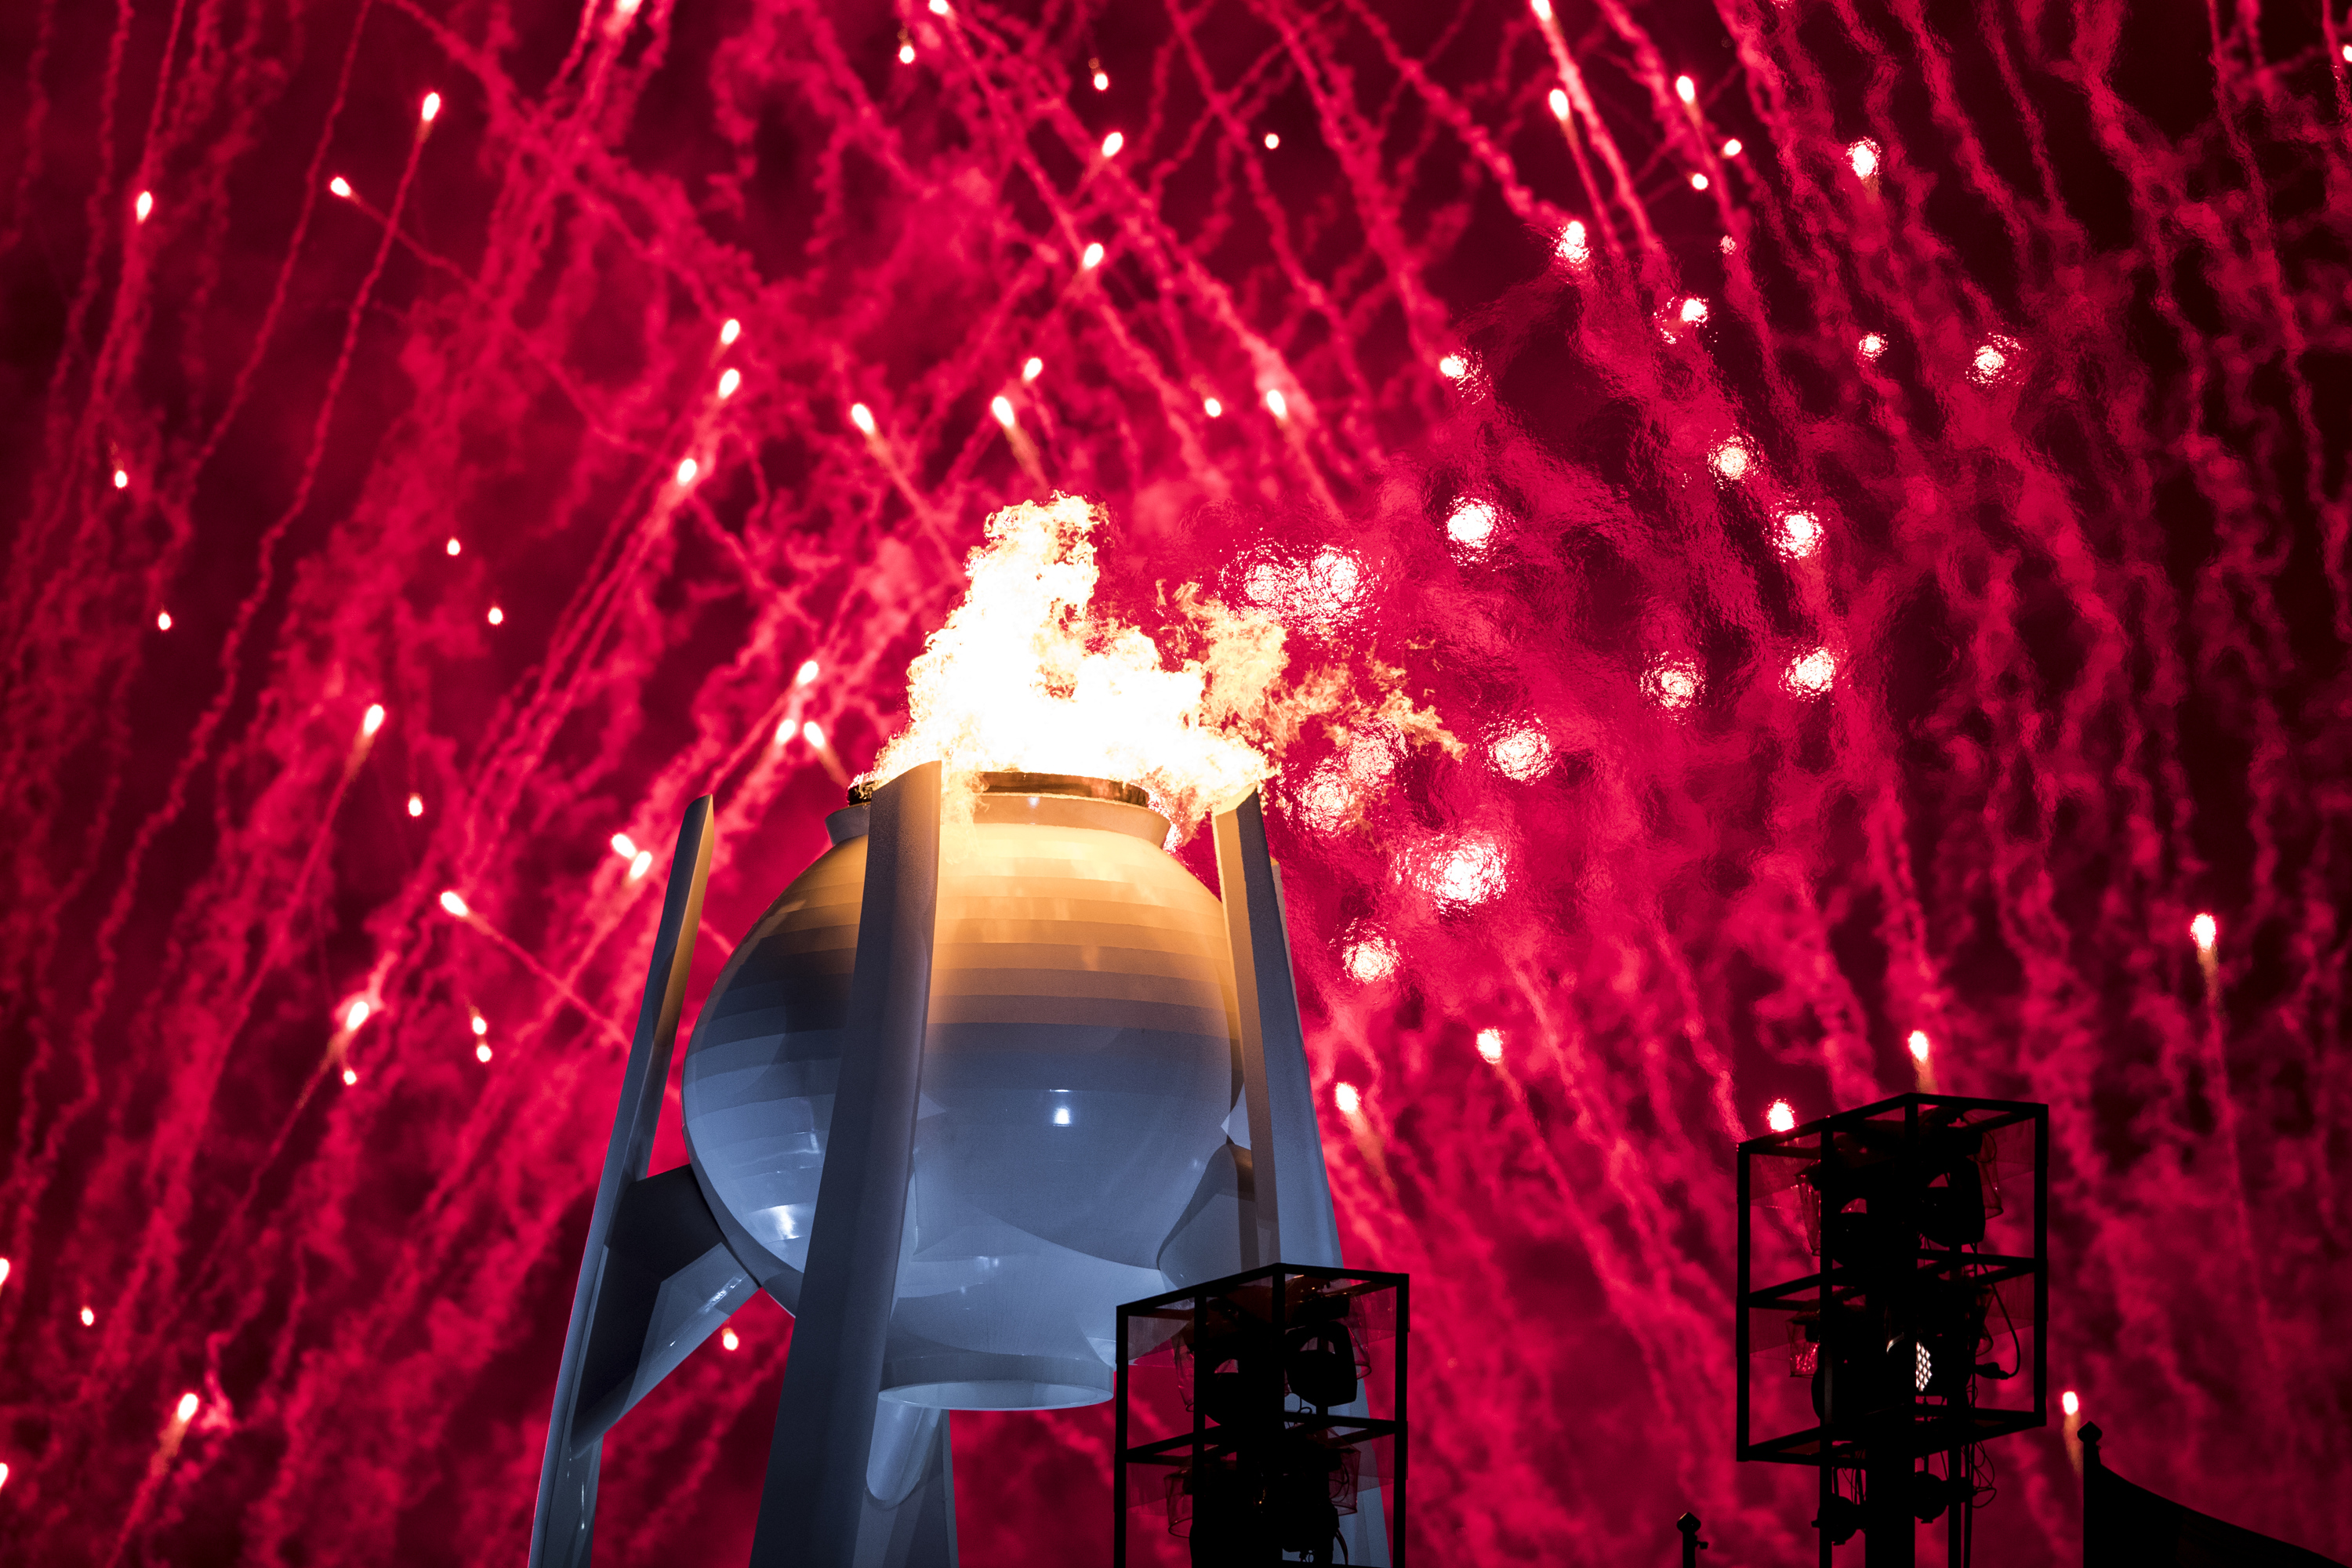 PYEONGCHANG-GUN, SOUTH KOREA - FEBRUARY 09:  Fireworks erupt as the Olympic Cauldron is lit during the Opening Ceremony of the PyeongChang 2018 Winter Olympic Games at PyeongChang Olympic Stadium on February 9, 2018 in Pyeongchang-gun, South Korea.  (Photo by XIN LI/Getty Images)